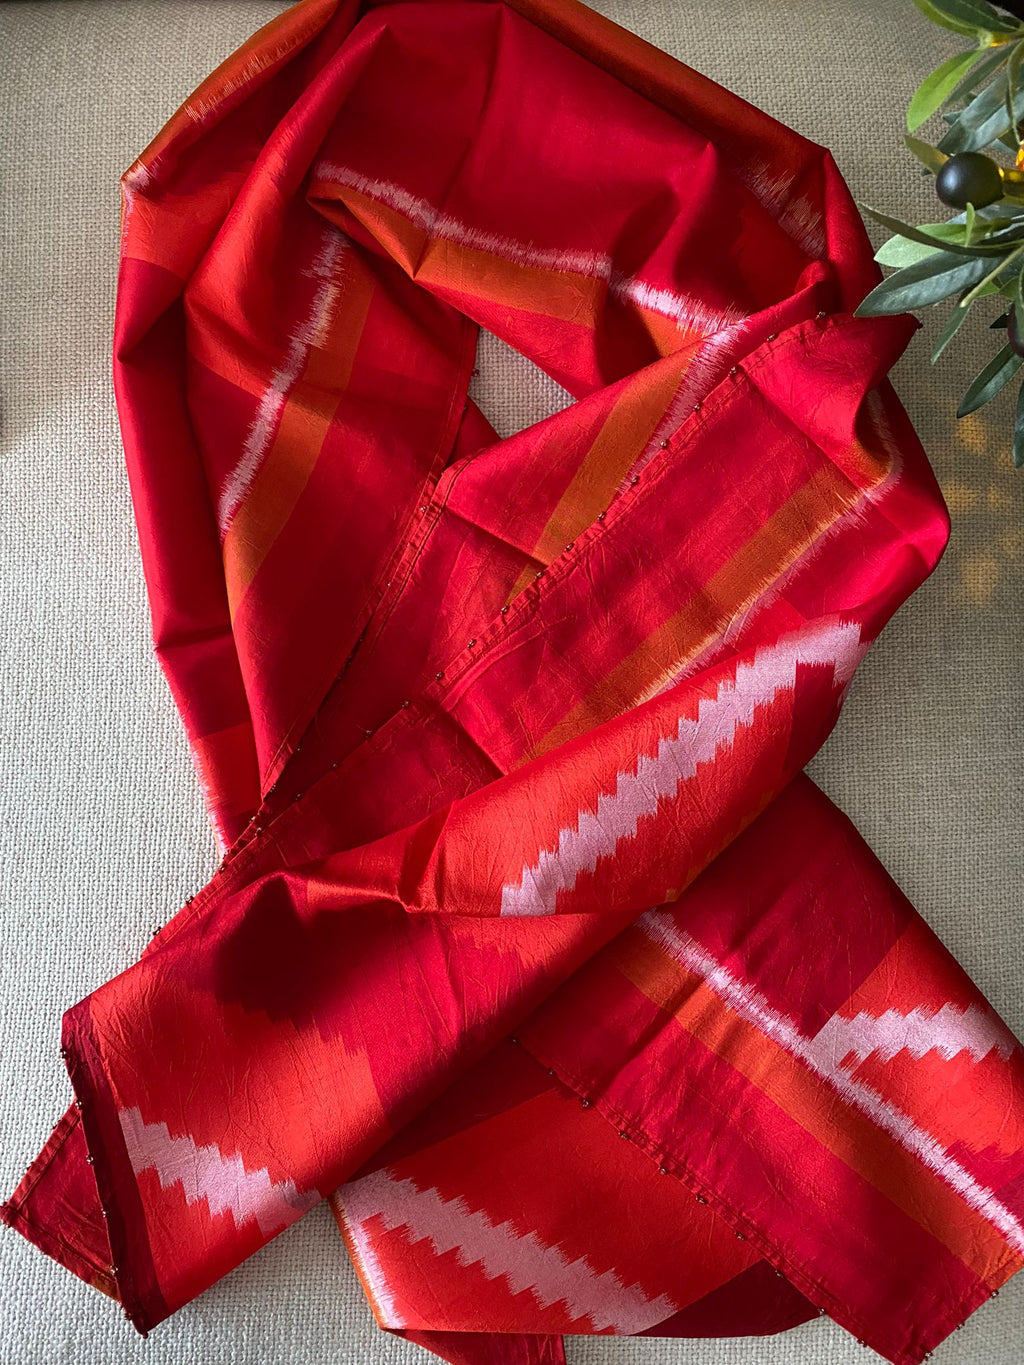 Handwoven IKAT SILK STOLE,red-